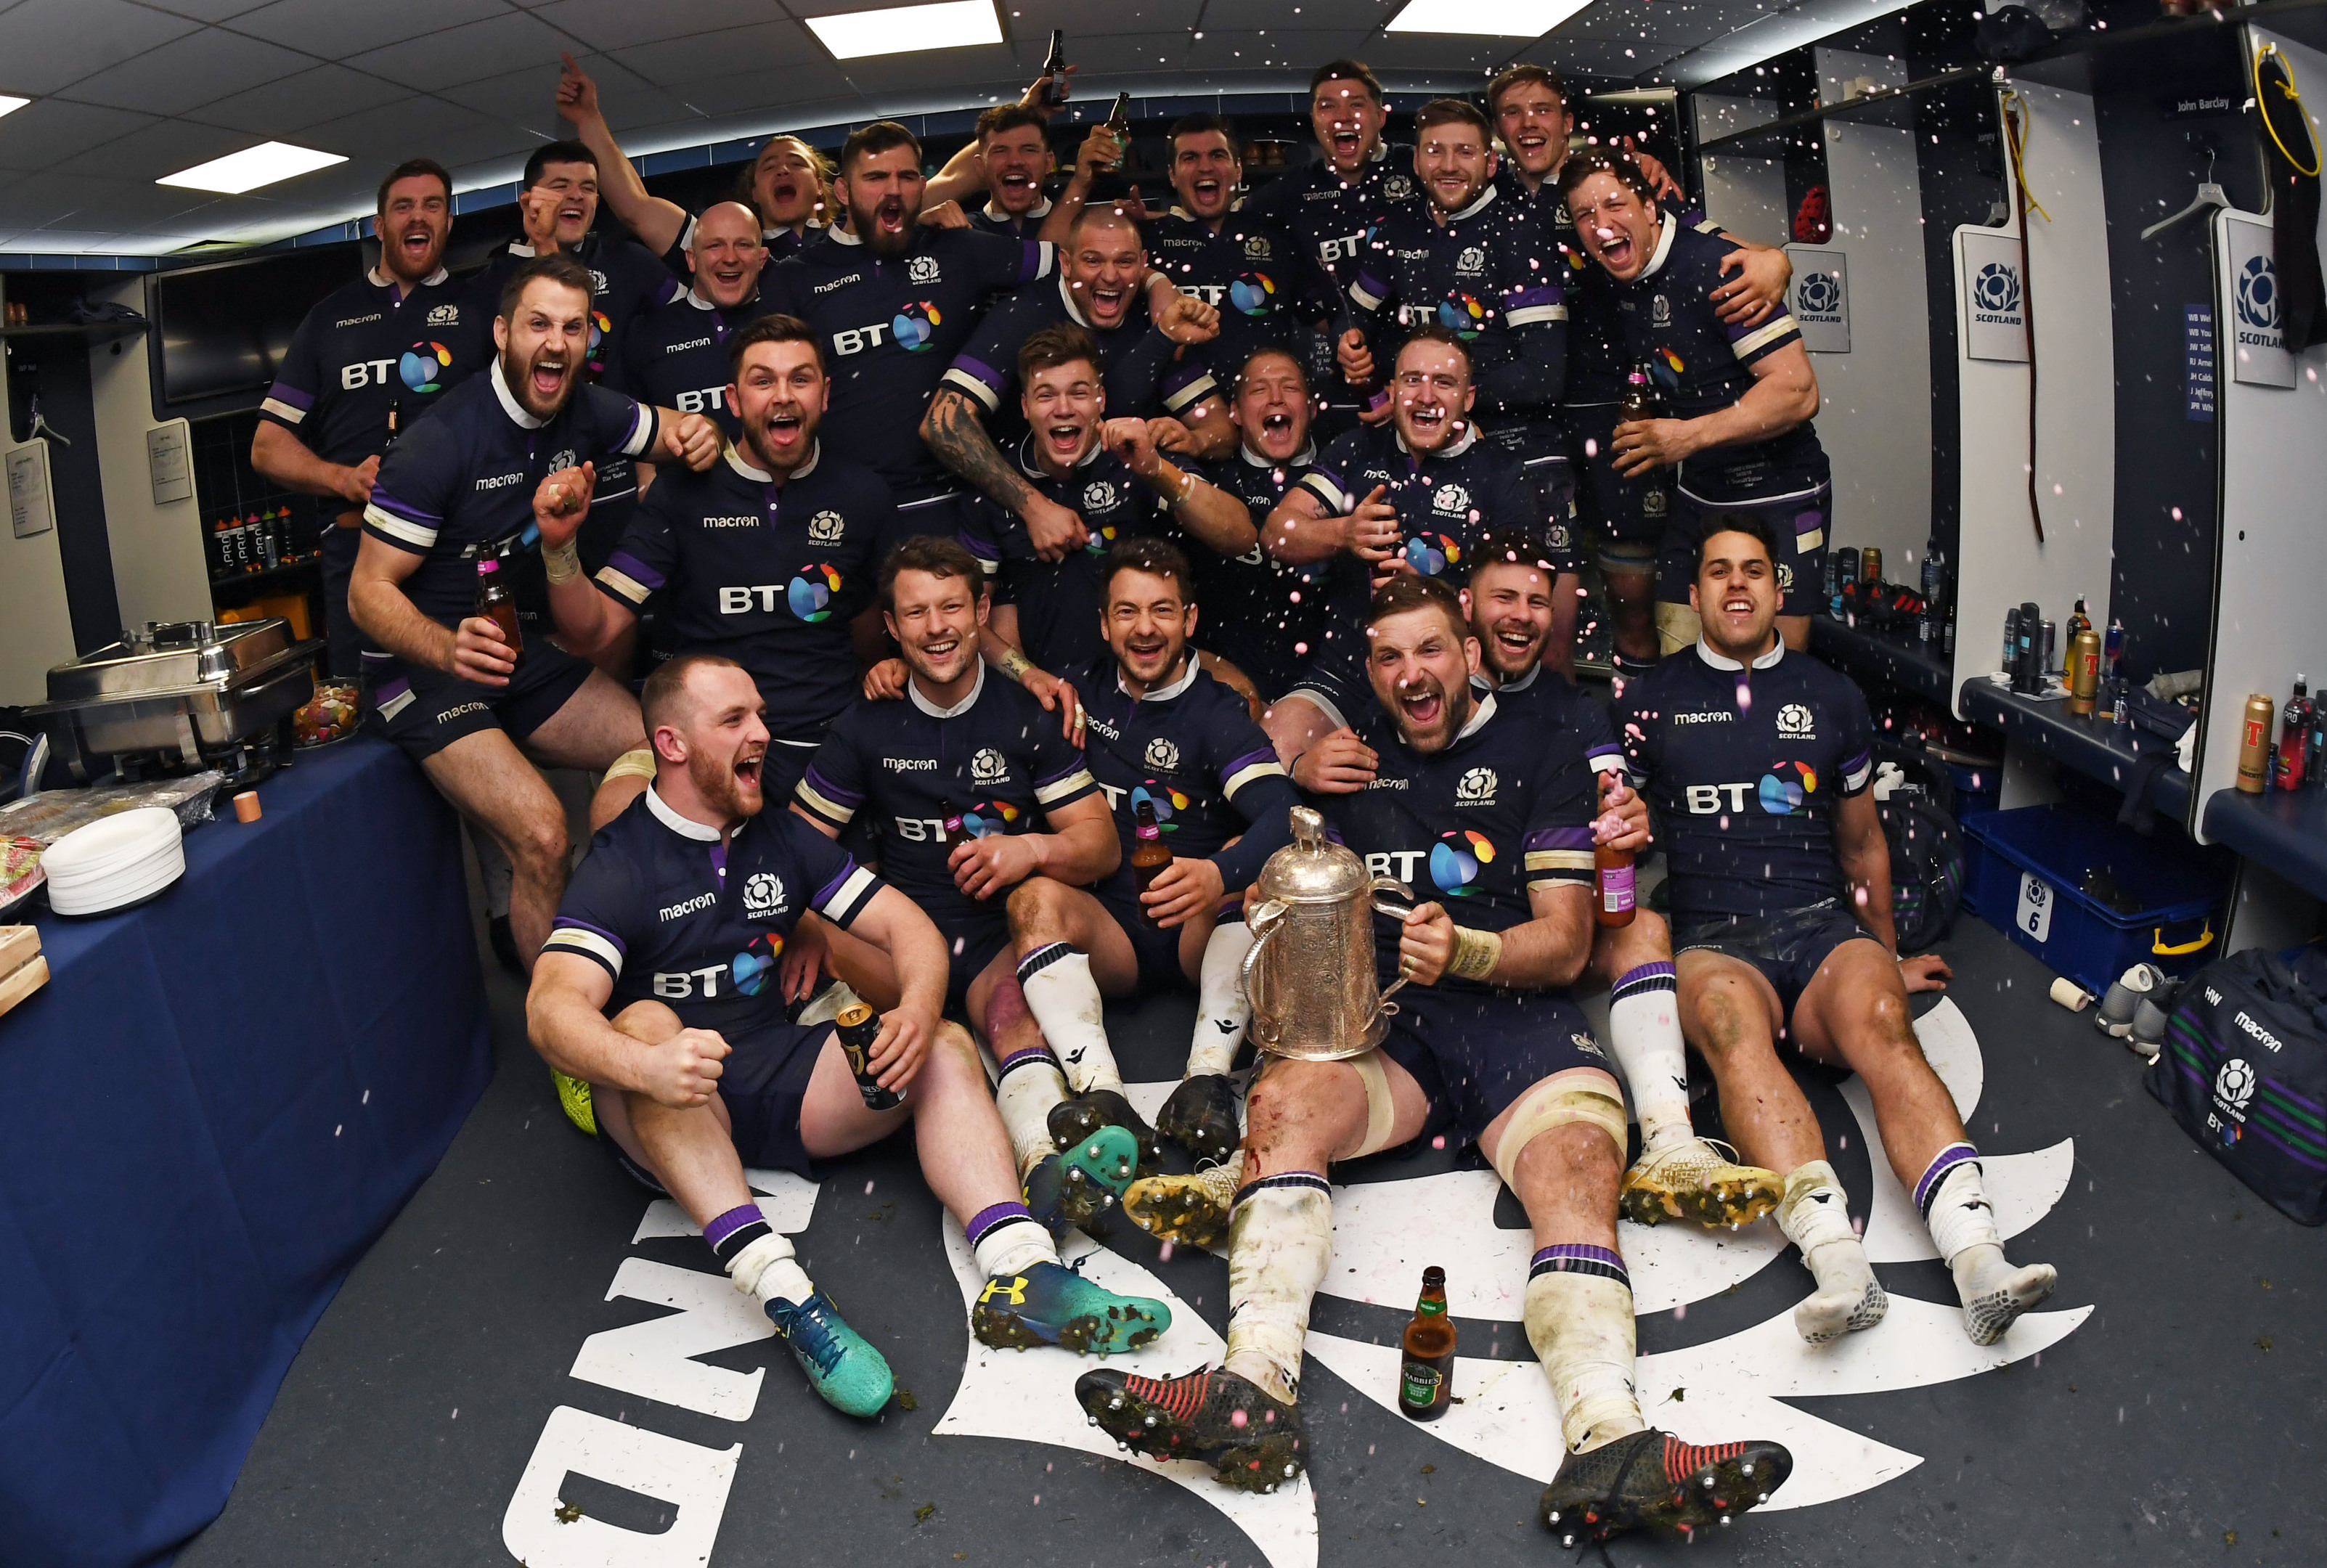 Scotland's men fifth best rugby team in the world following